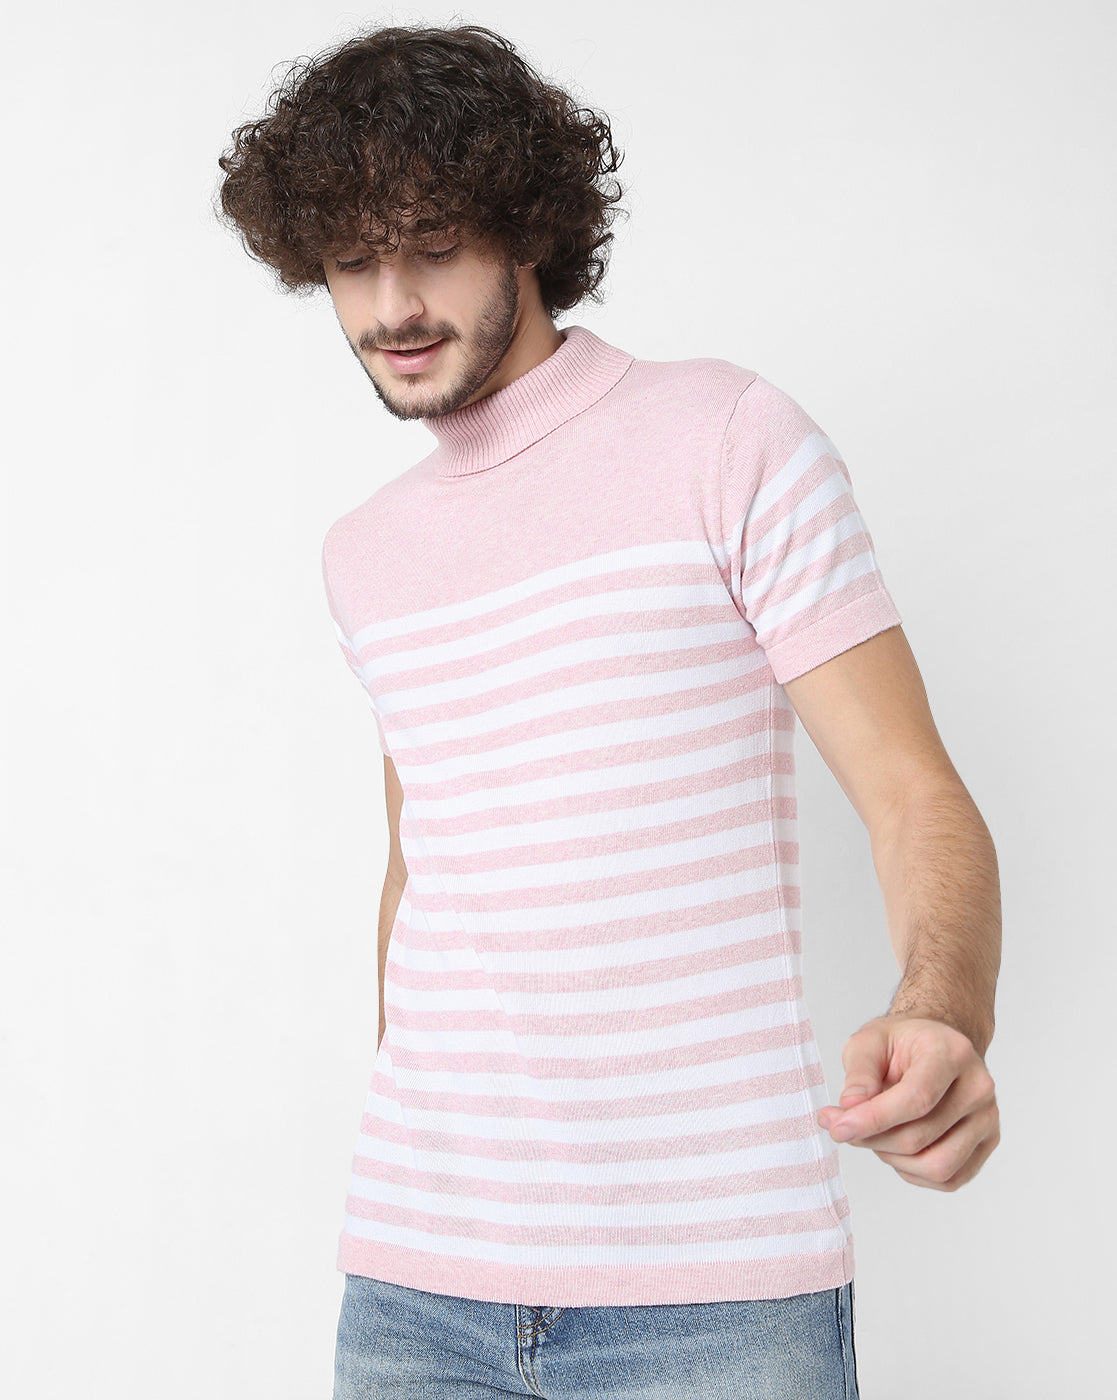 Baby Pink Striped Flat Knit Turtle Neck T-Shirt